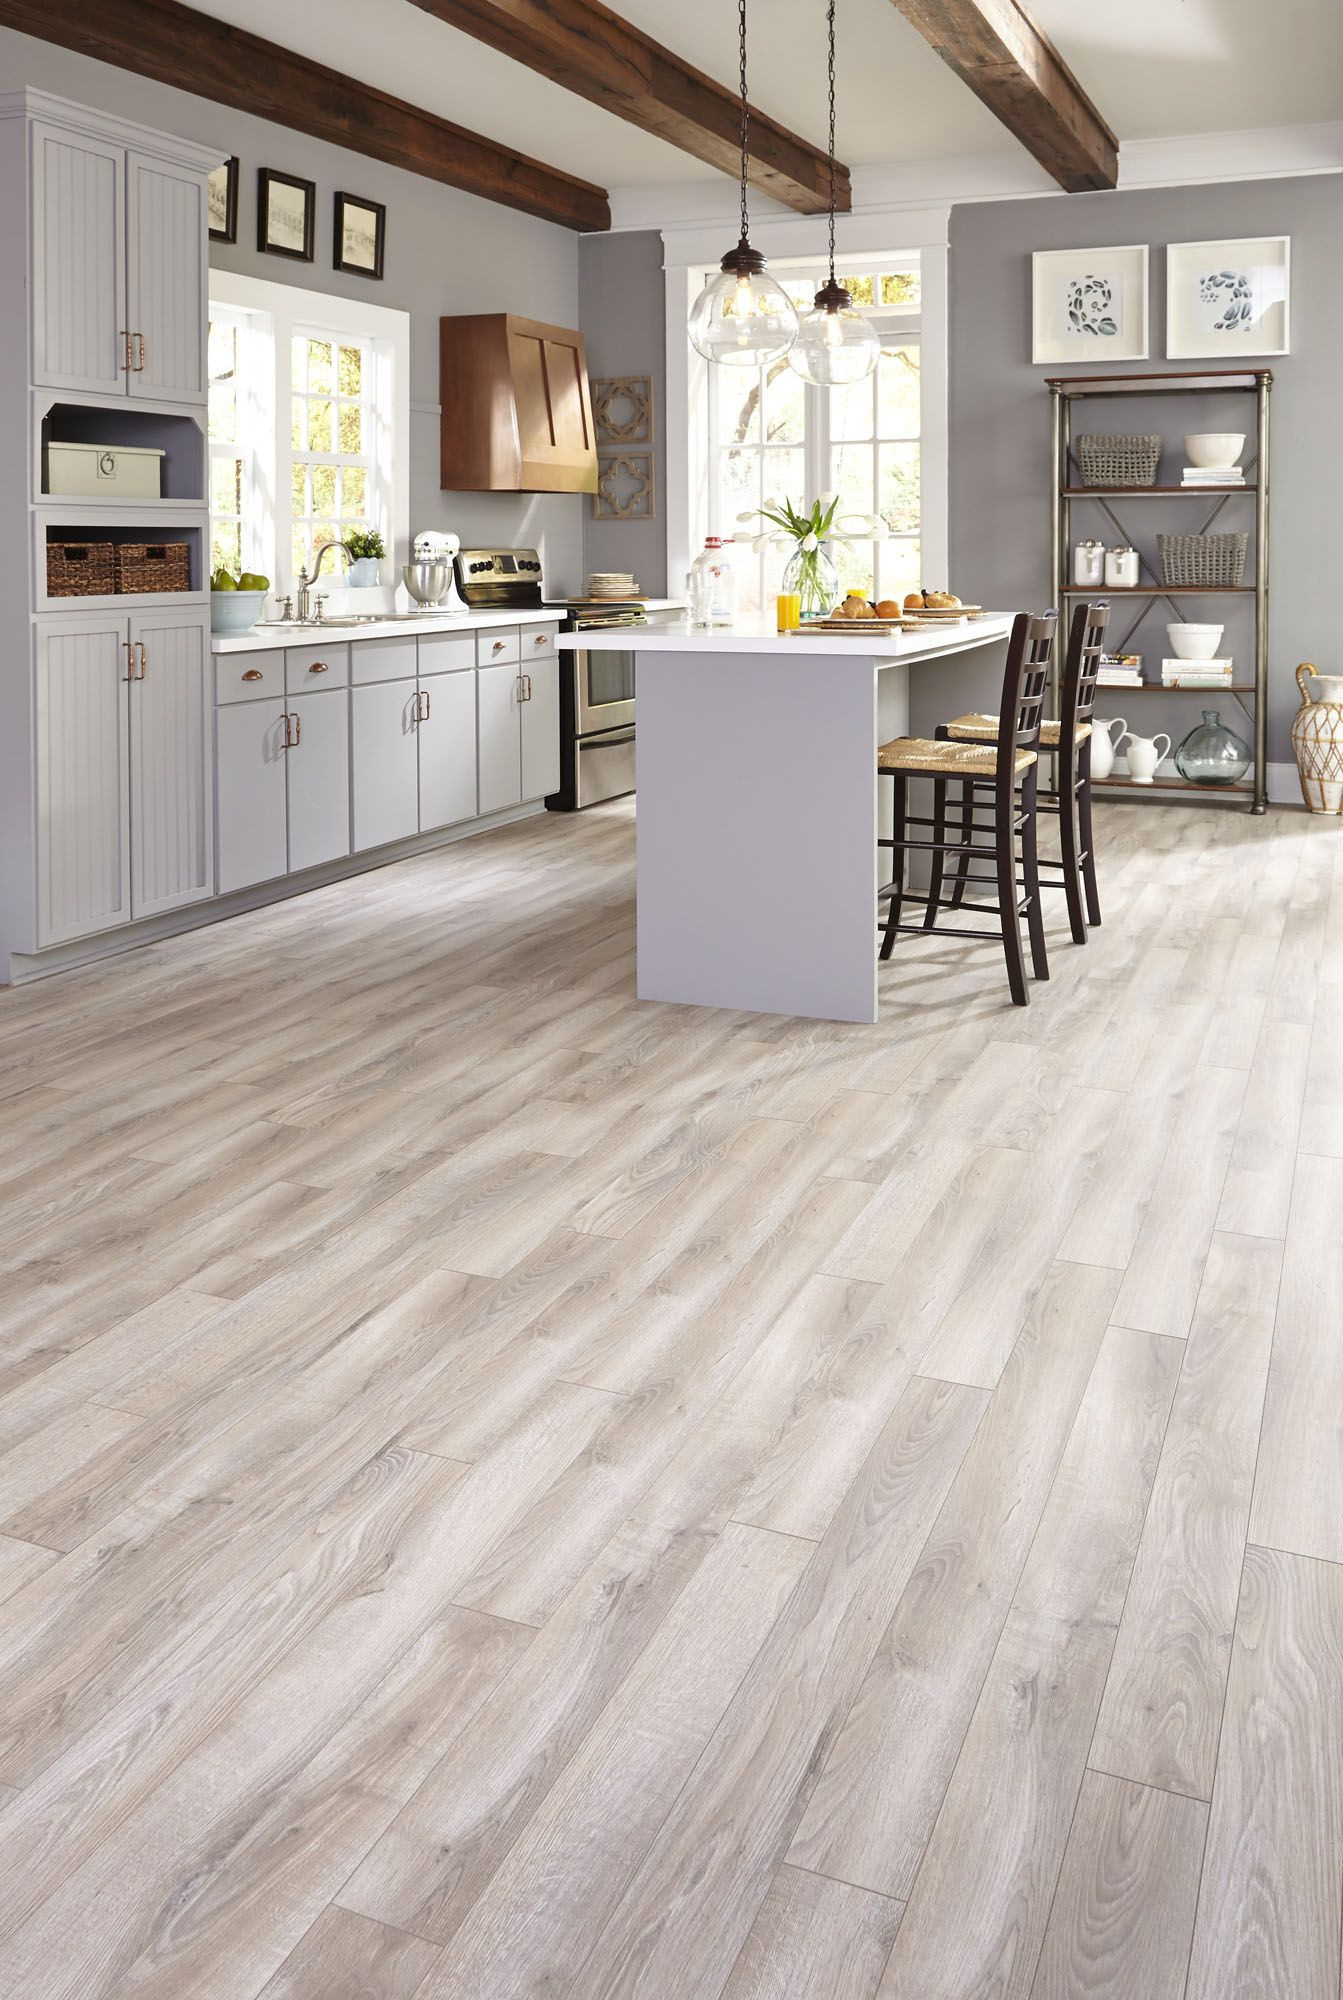 16 Awesome Laminate Flooring Vs Hardwood Resale Value 2024 free download laminate flooring vs hardwood resale value of best laminate flooring brands floor plan ideas in best laminate flooring brands gray tones mixed with light creams and tans suggest a floor worn